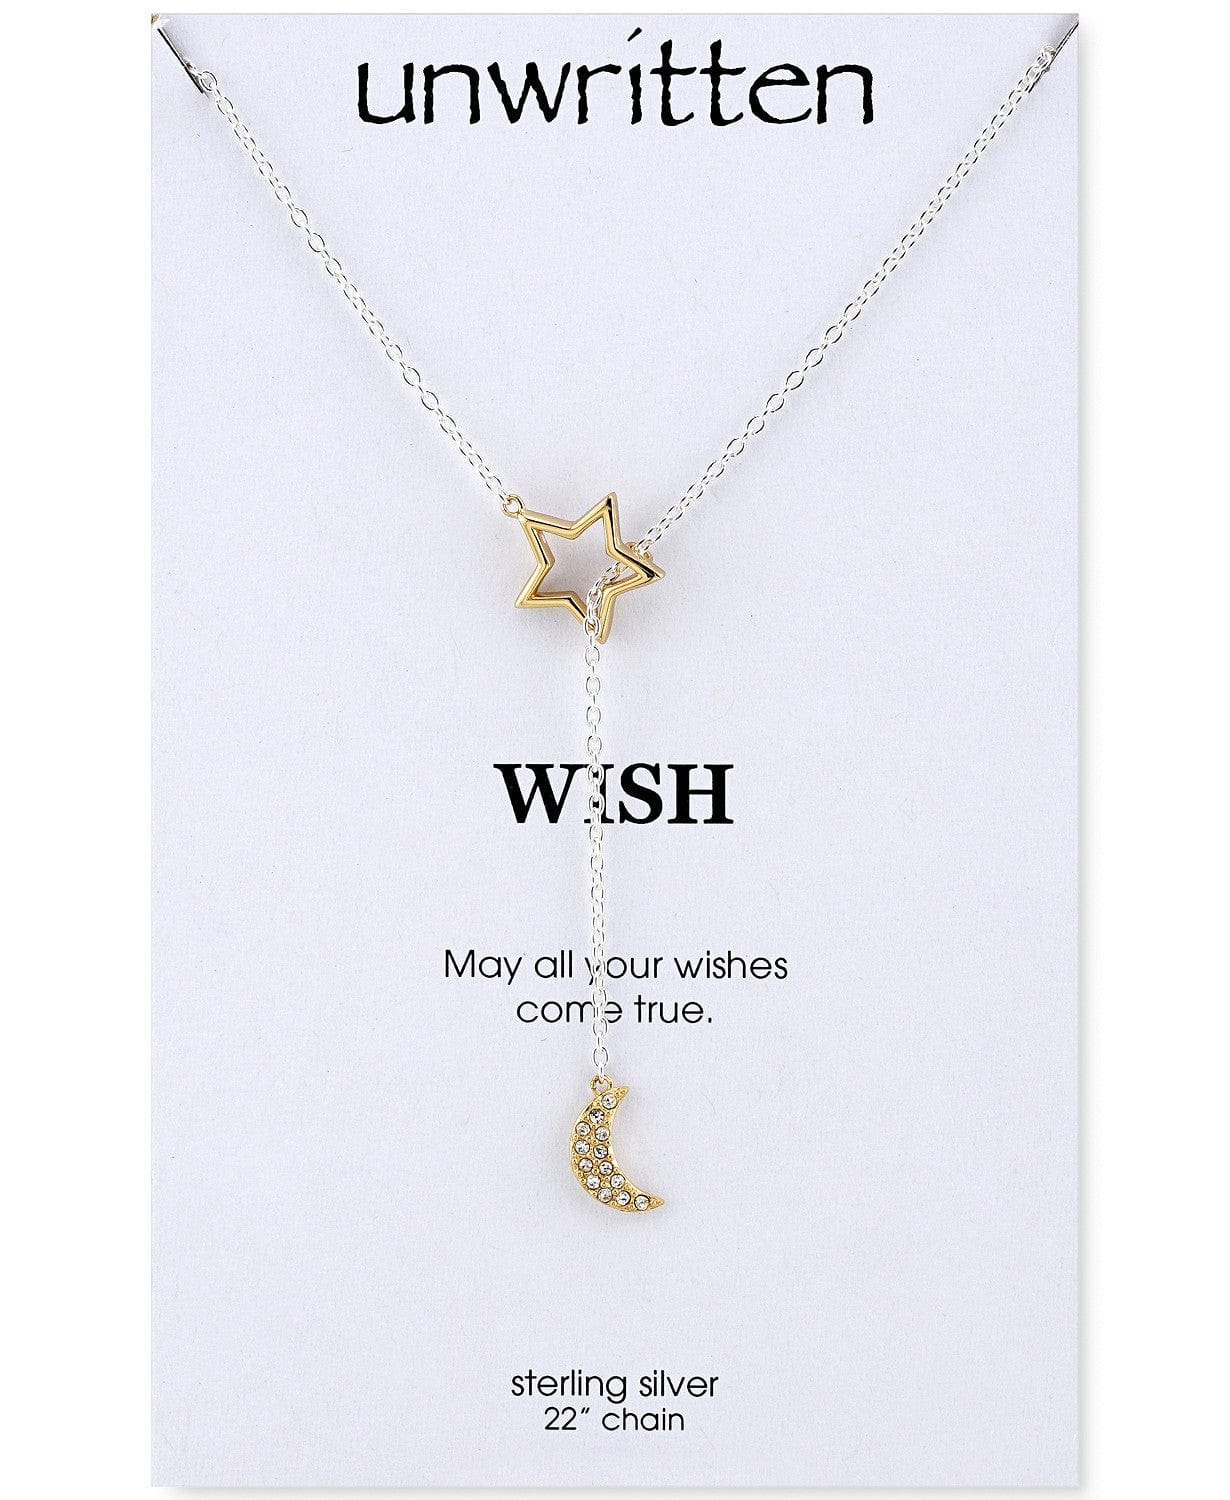 Unwritten "Wish", Moon & Star Lariat Necklace 24" - The Pink Pigs, A Compassionate Boutique